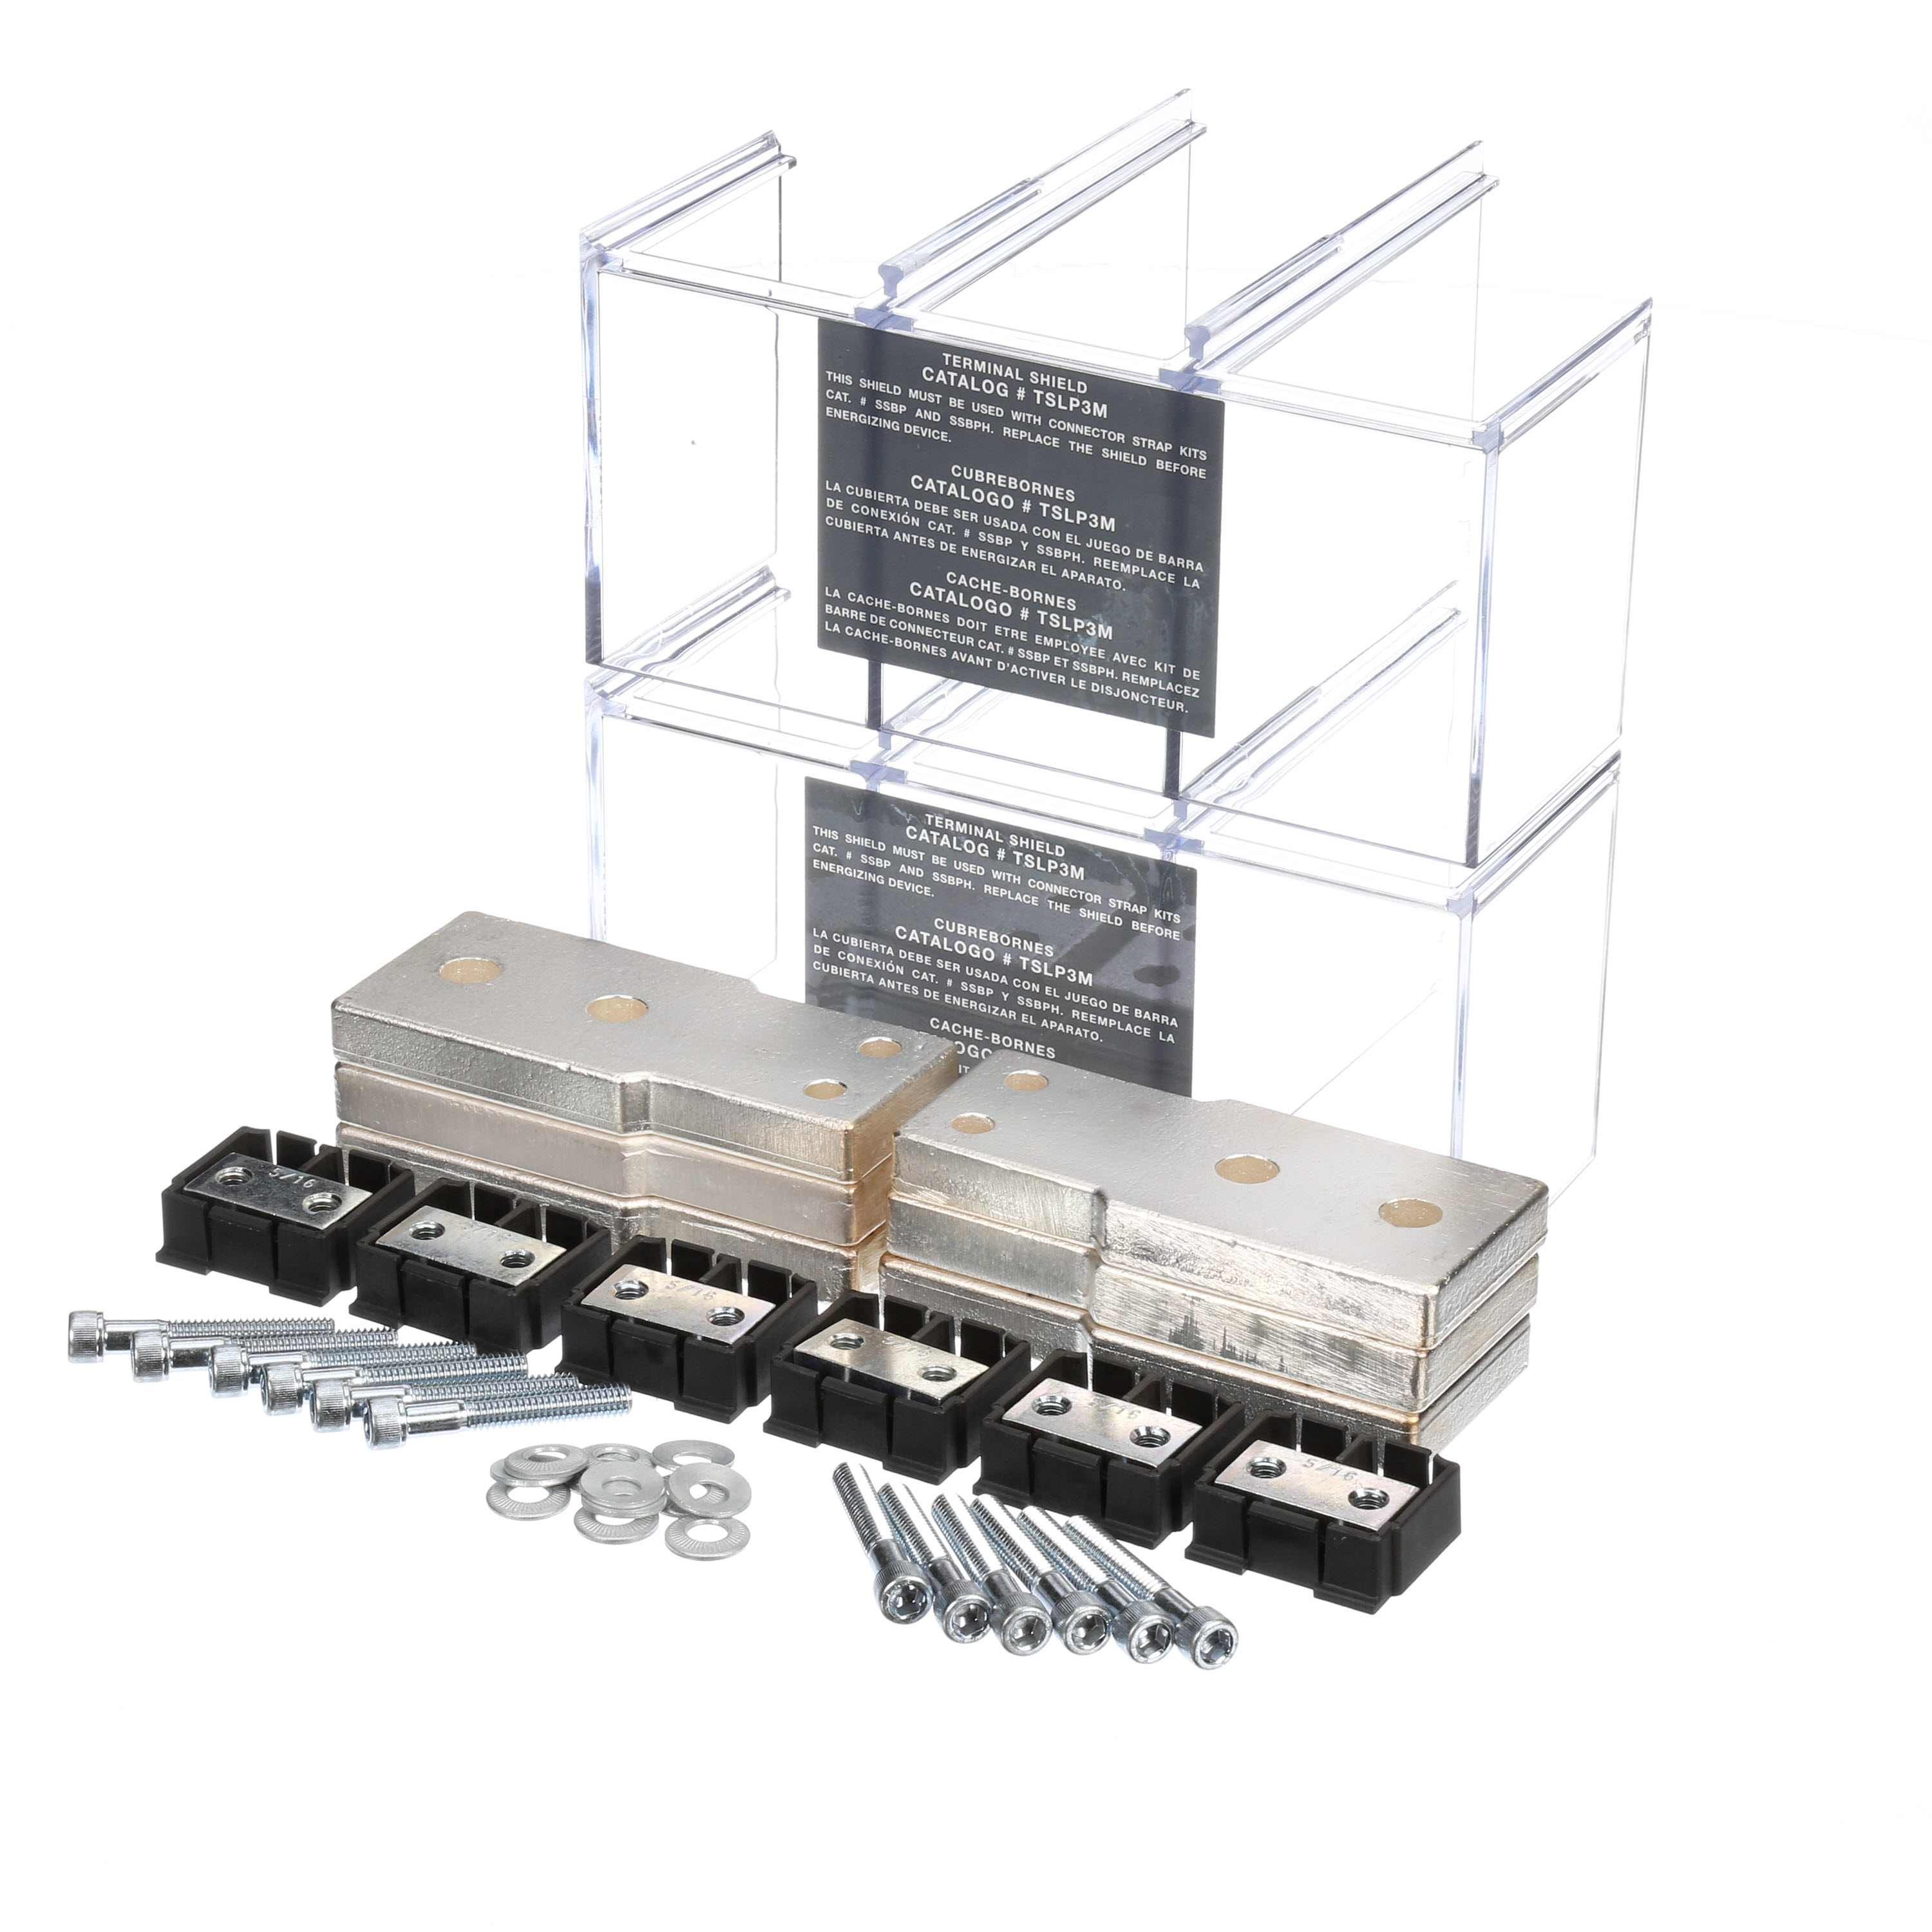 ACCESSORY FOR CIRCUIT BREAKER 3VL71 (NG) UND 3VL81 (PG) FRONT BUSBAR CONNECTIONCONSISTING OF 6 CONNECTIONS 3 POLE